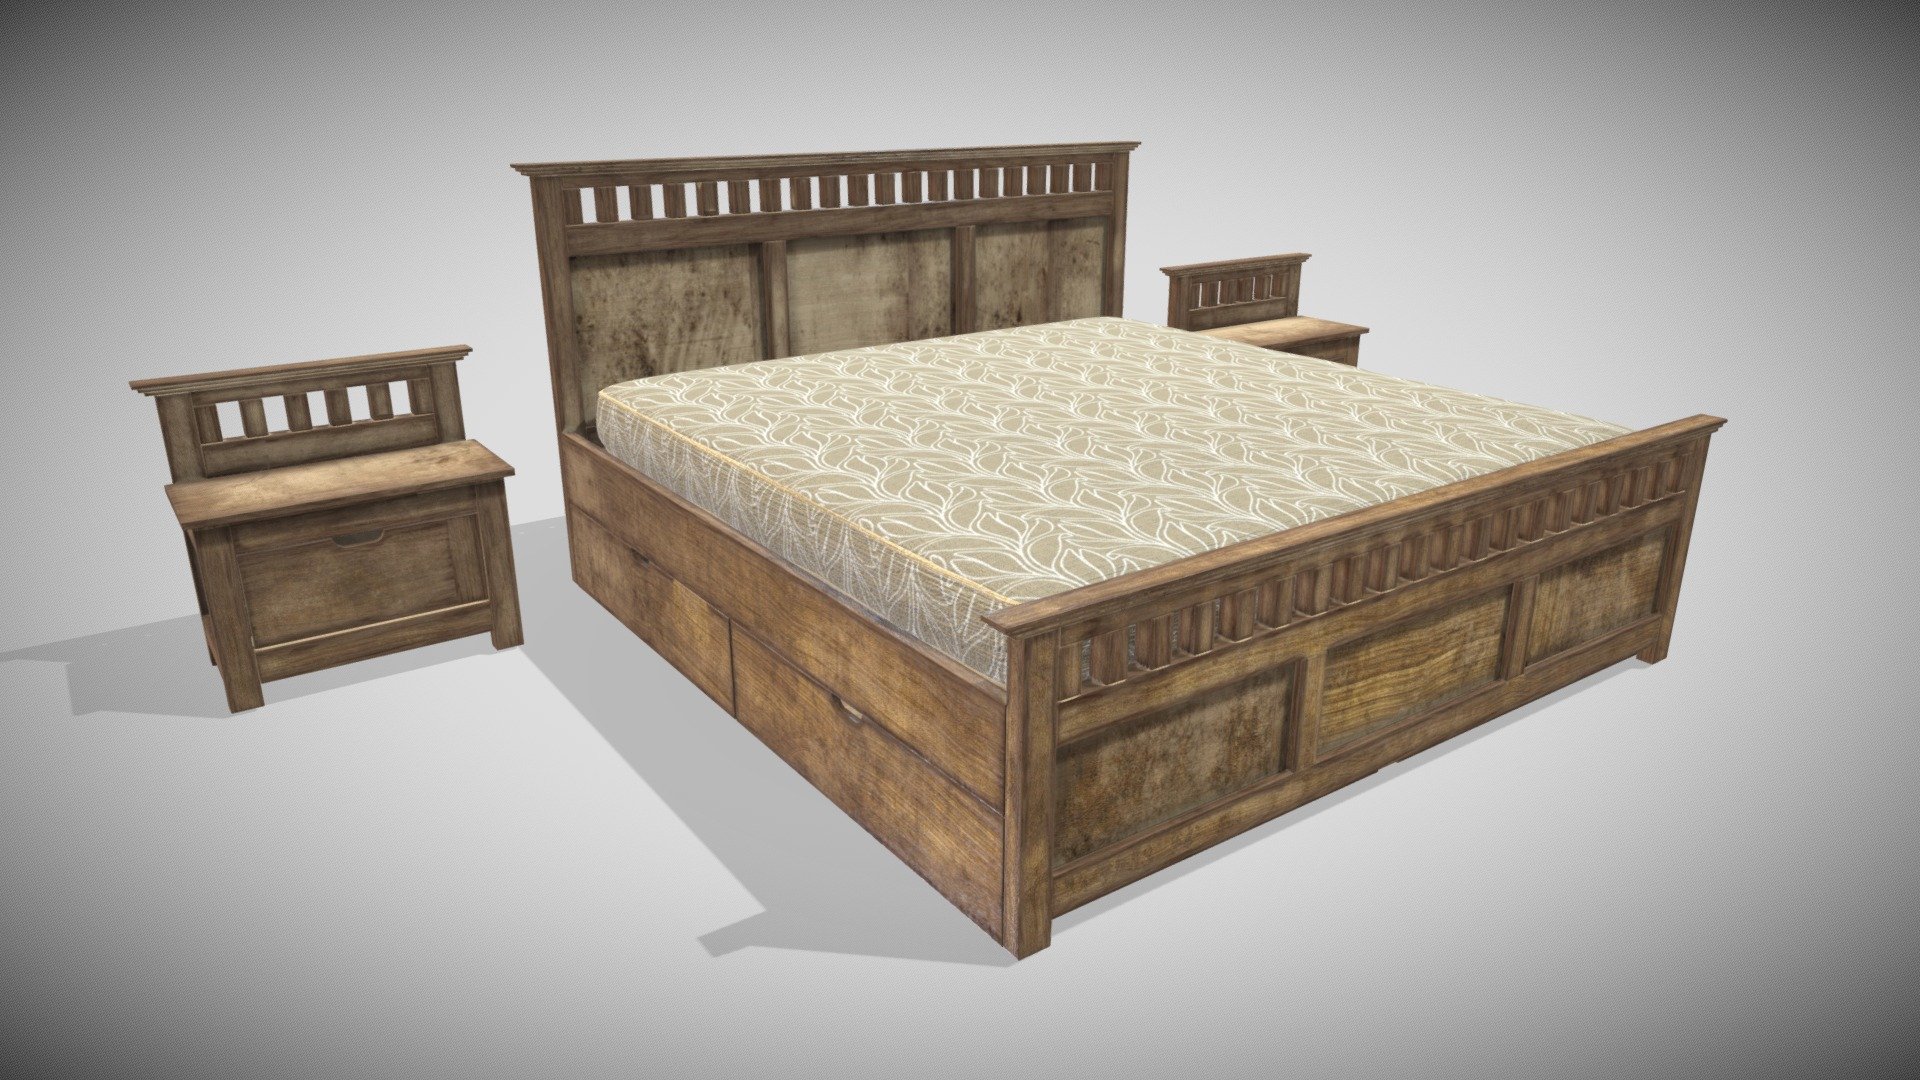 2 Material 4K PBR Metalness - Wood Texture seamless can plugged, UV goes orizontal ....

Fabric other PBR Material

All Quads Smoothable - Furniture Set Mobili Uxu - Buy Royalty Free 3D model by Francesco Coldesina (@topfrank2013) 3d model